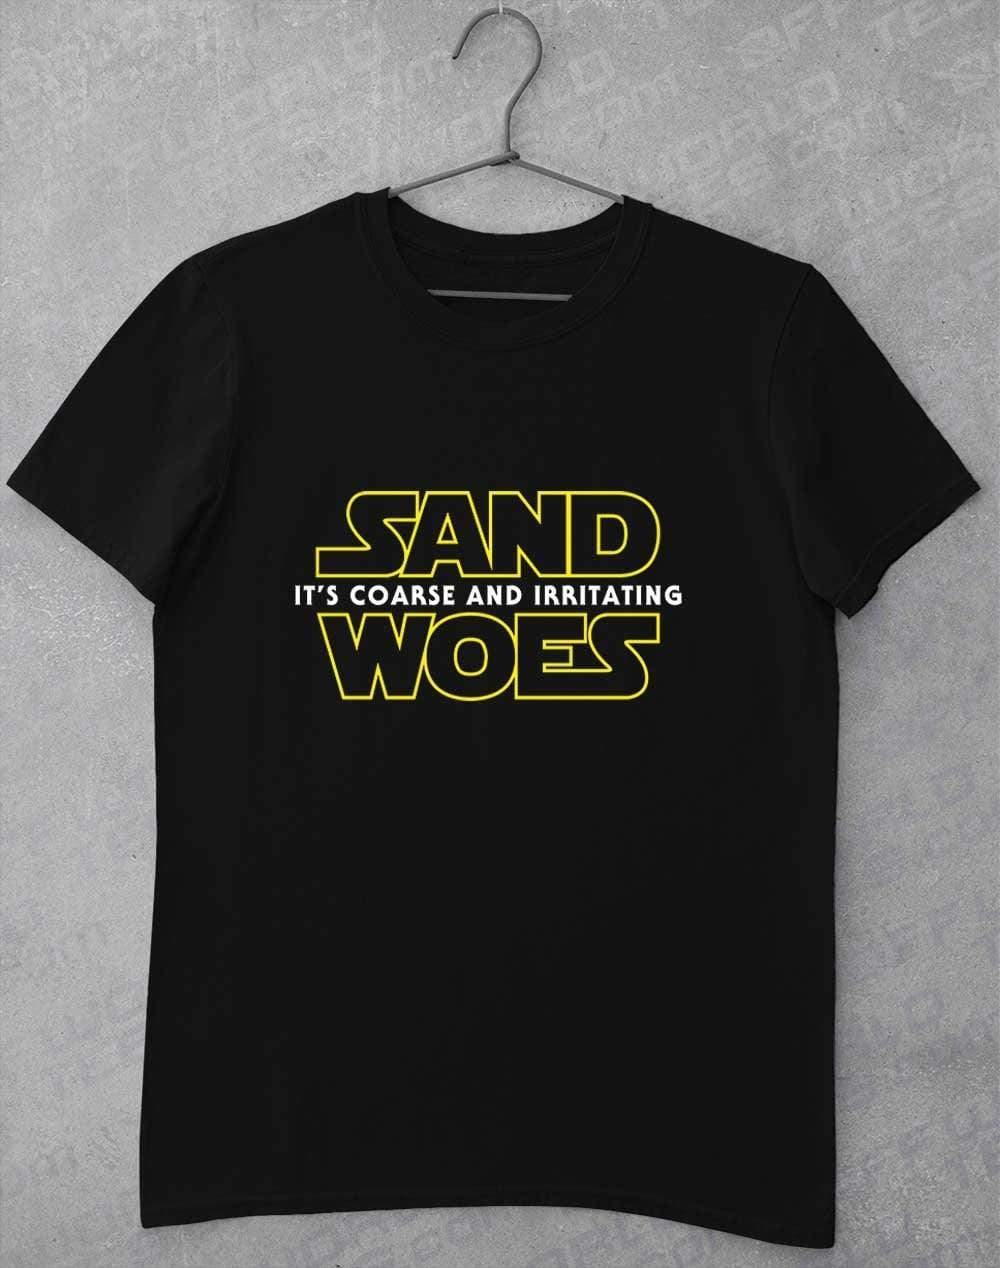 Sand Woes - T-Shirt S / Black  - Off World Tees